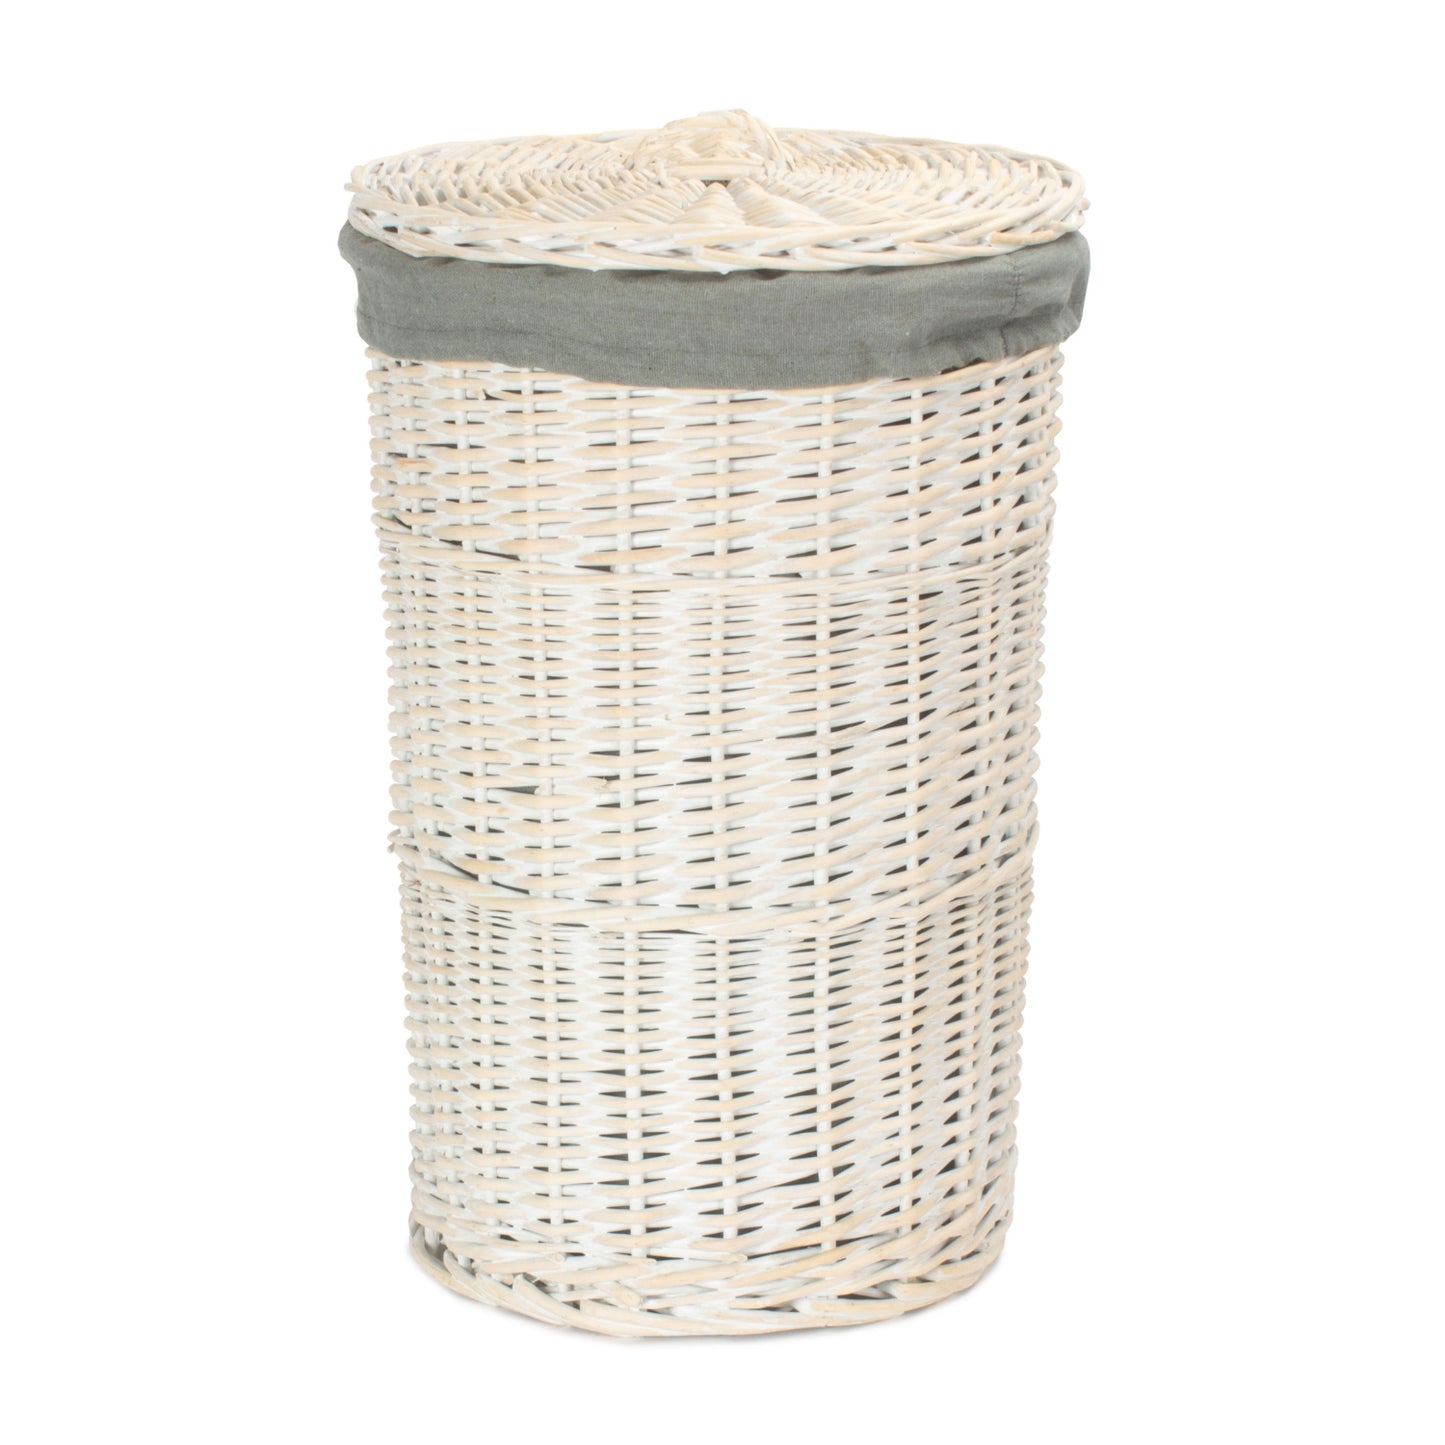 Small Round White Wash Laundry Hamper With Grey Sage Lining